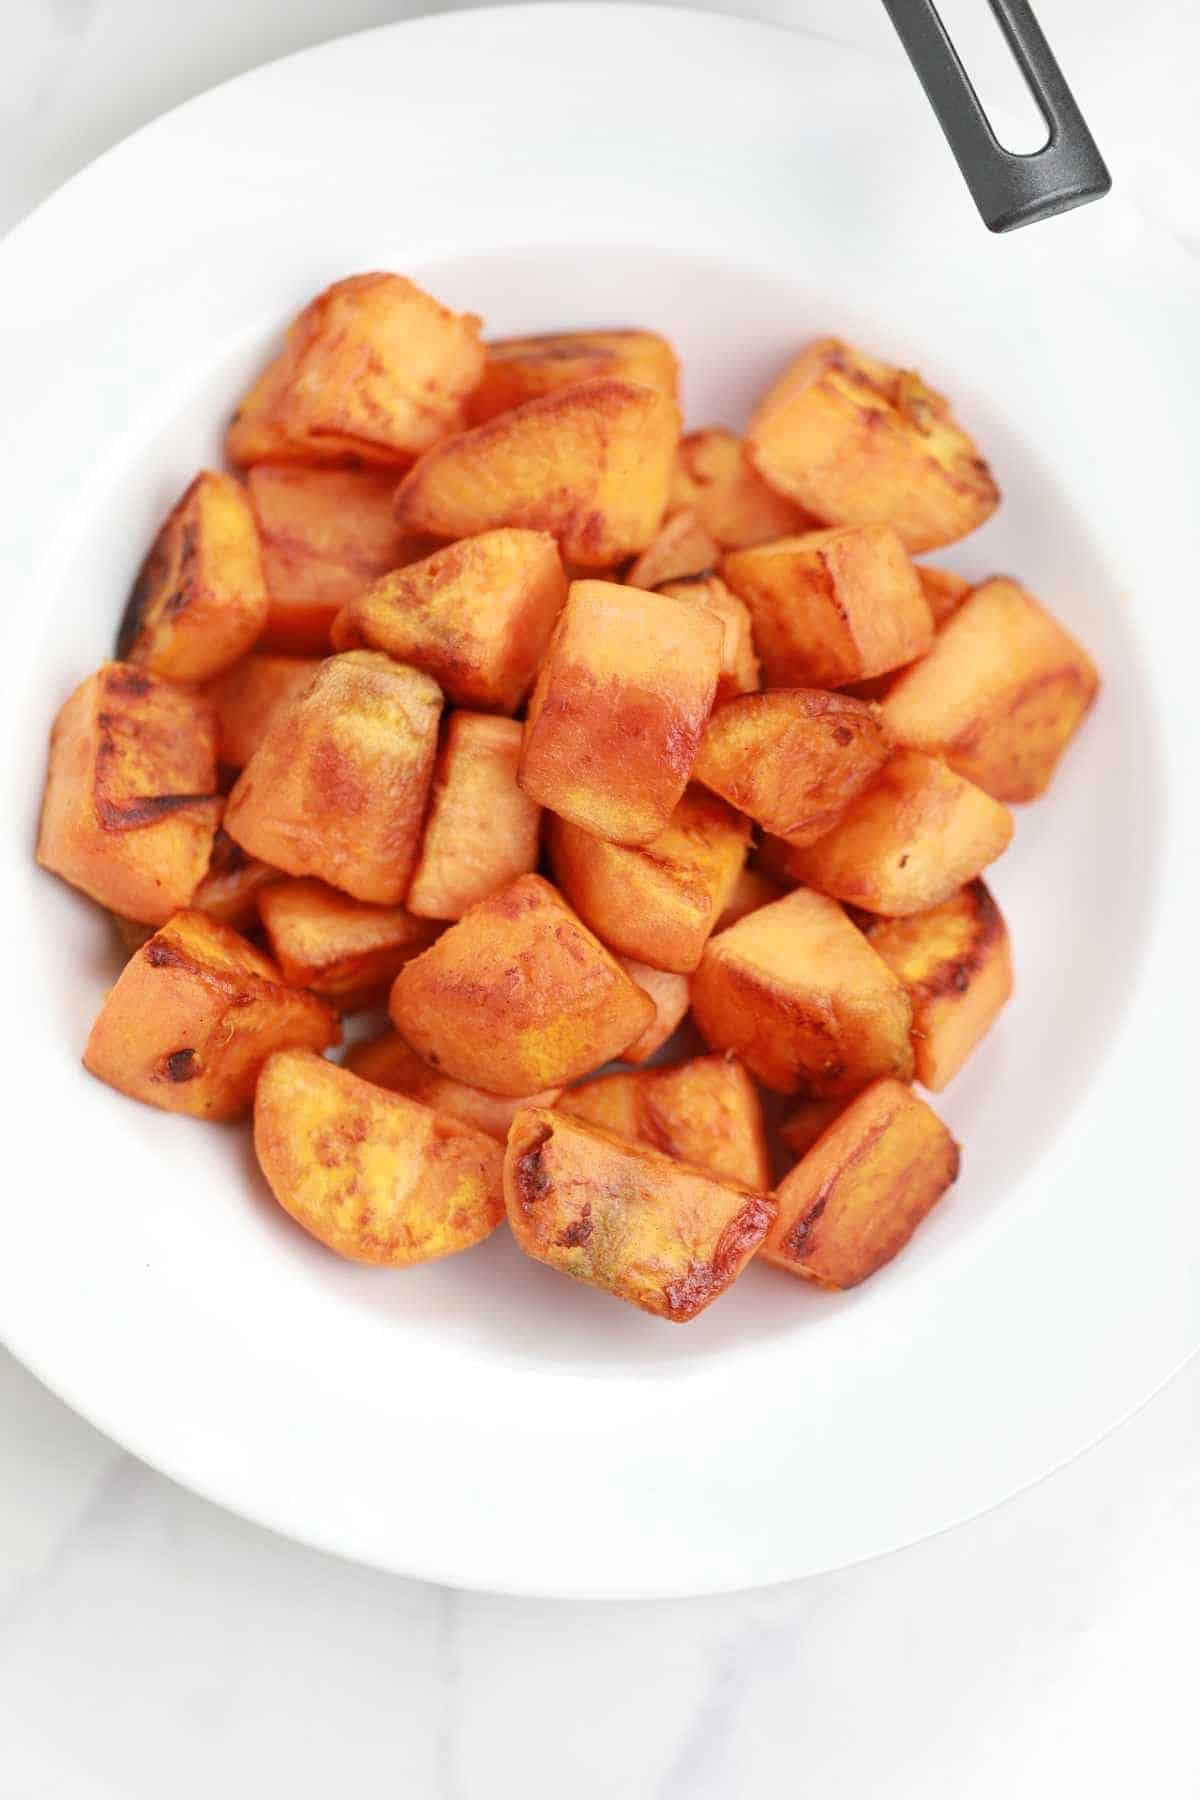 fried sweet potatoes served on a white plate.